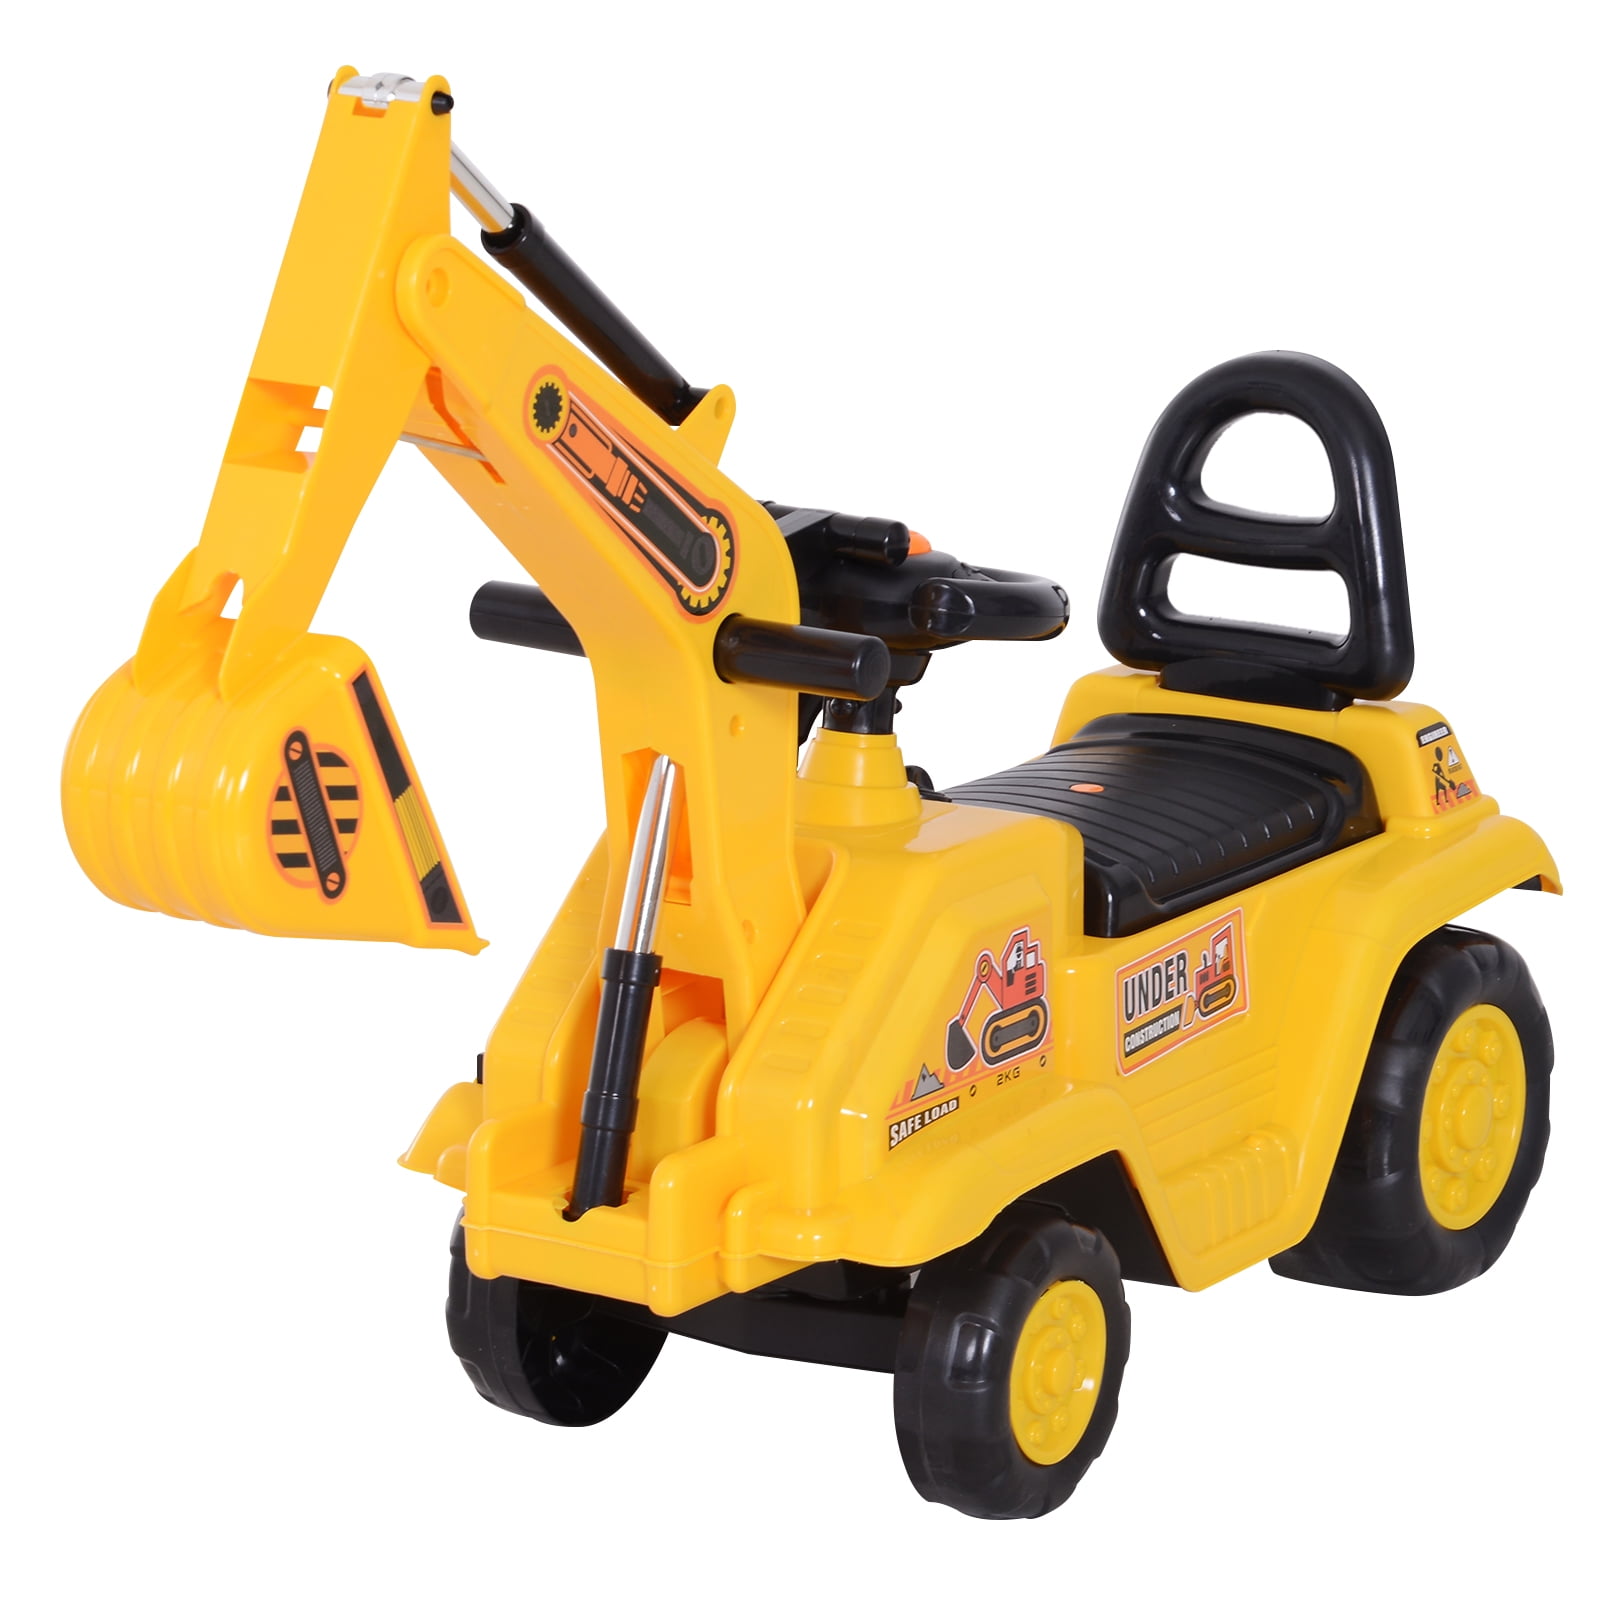 Details about   Kids Toddler Ride On Excavator Digger Truck Scooter w/ Sound & Seat Storage Toy 